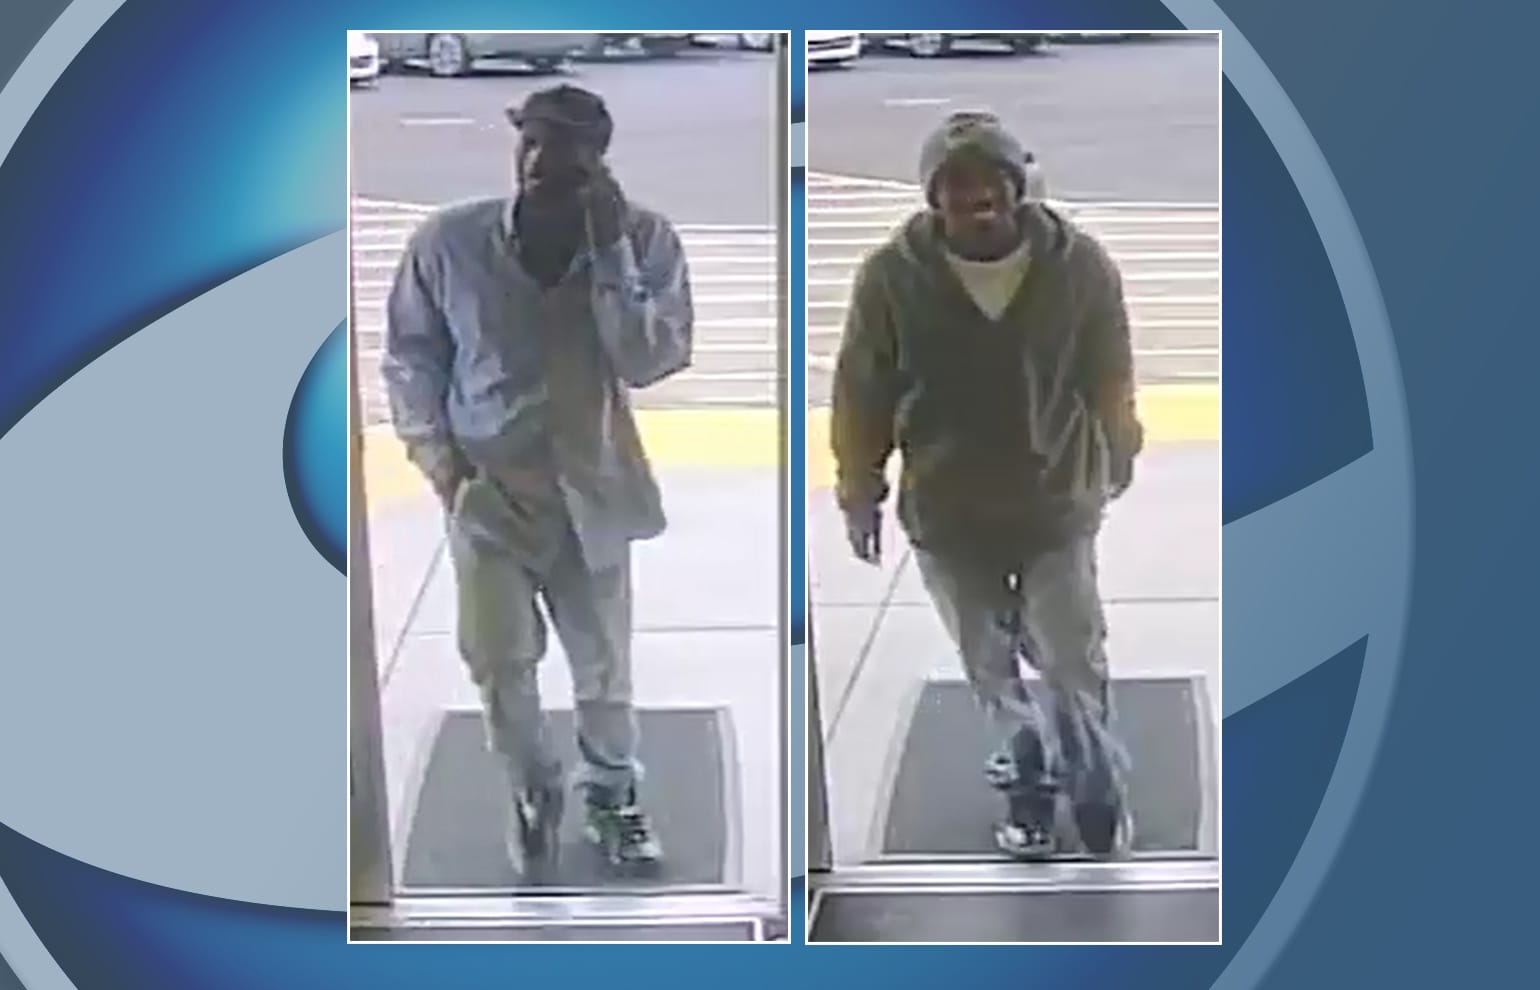 The Clark County Sheriff’s Office is seeking help in identifying these two men, who are suspects in the theft of approximately $1,700 worth of items from the Walgreens at 6708 N.E. 63rd St. in Vancouver.